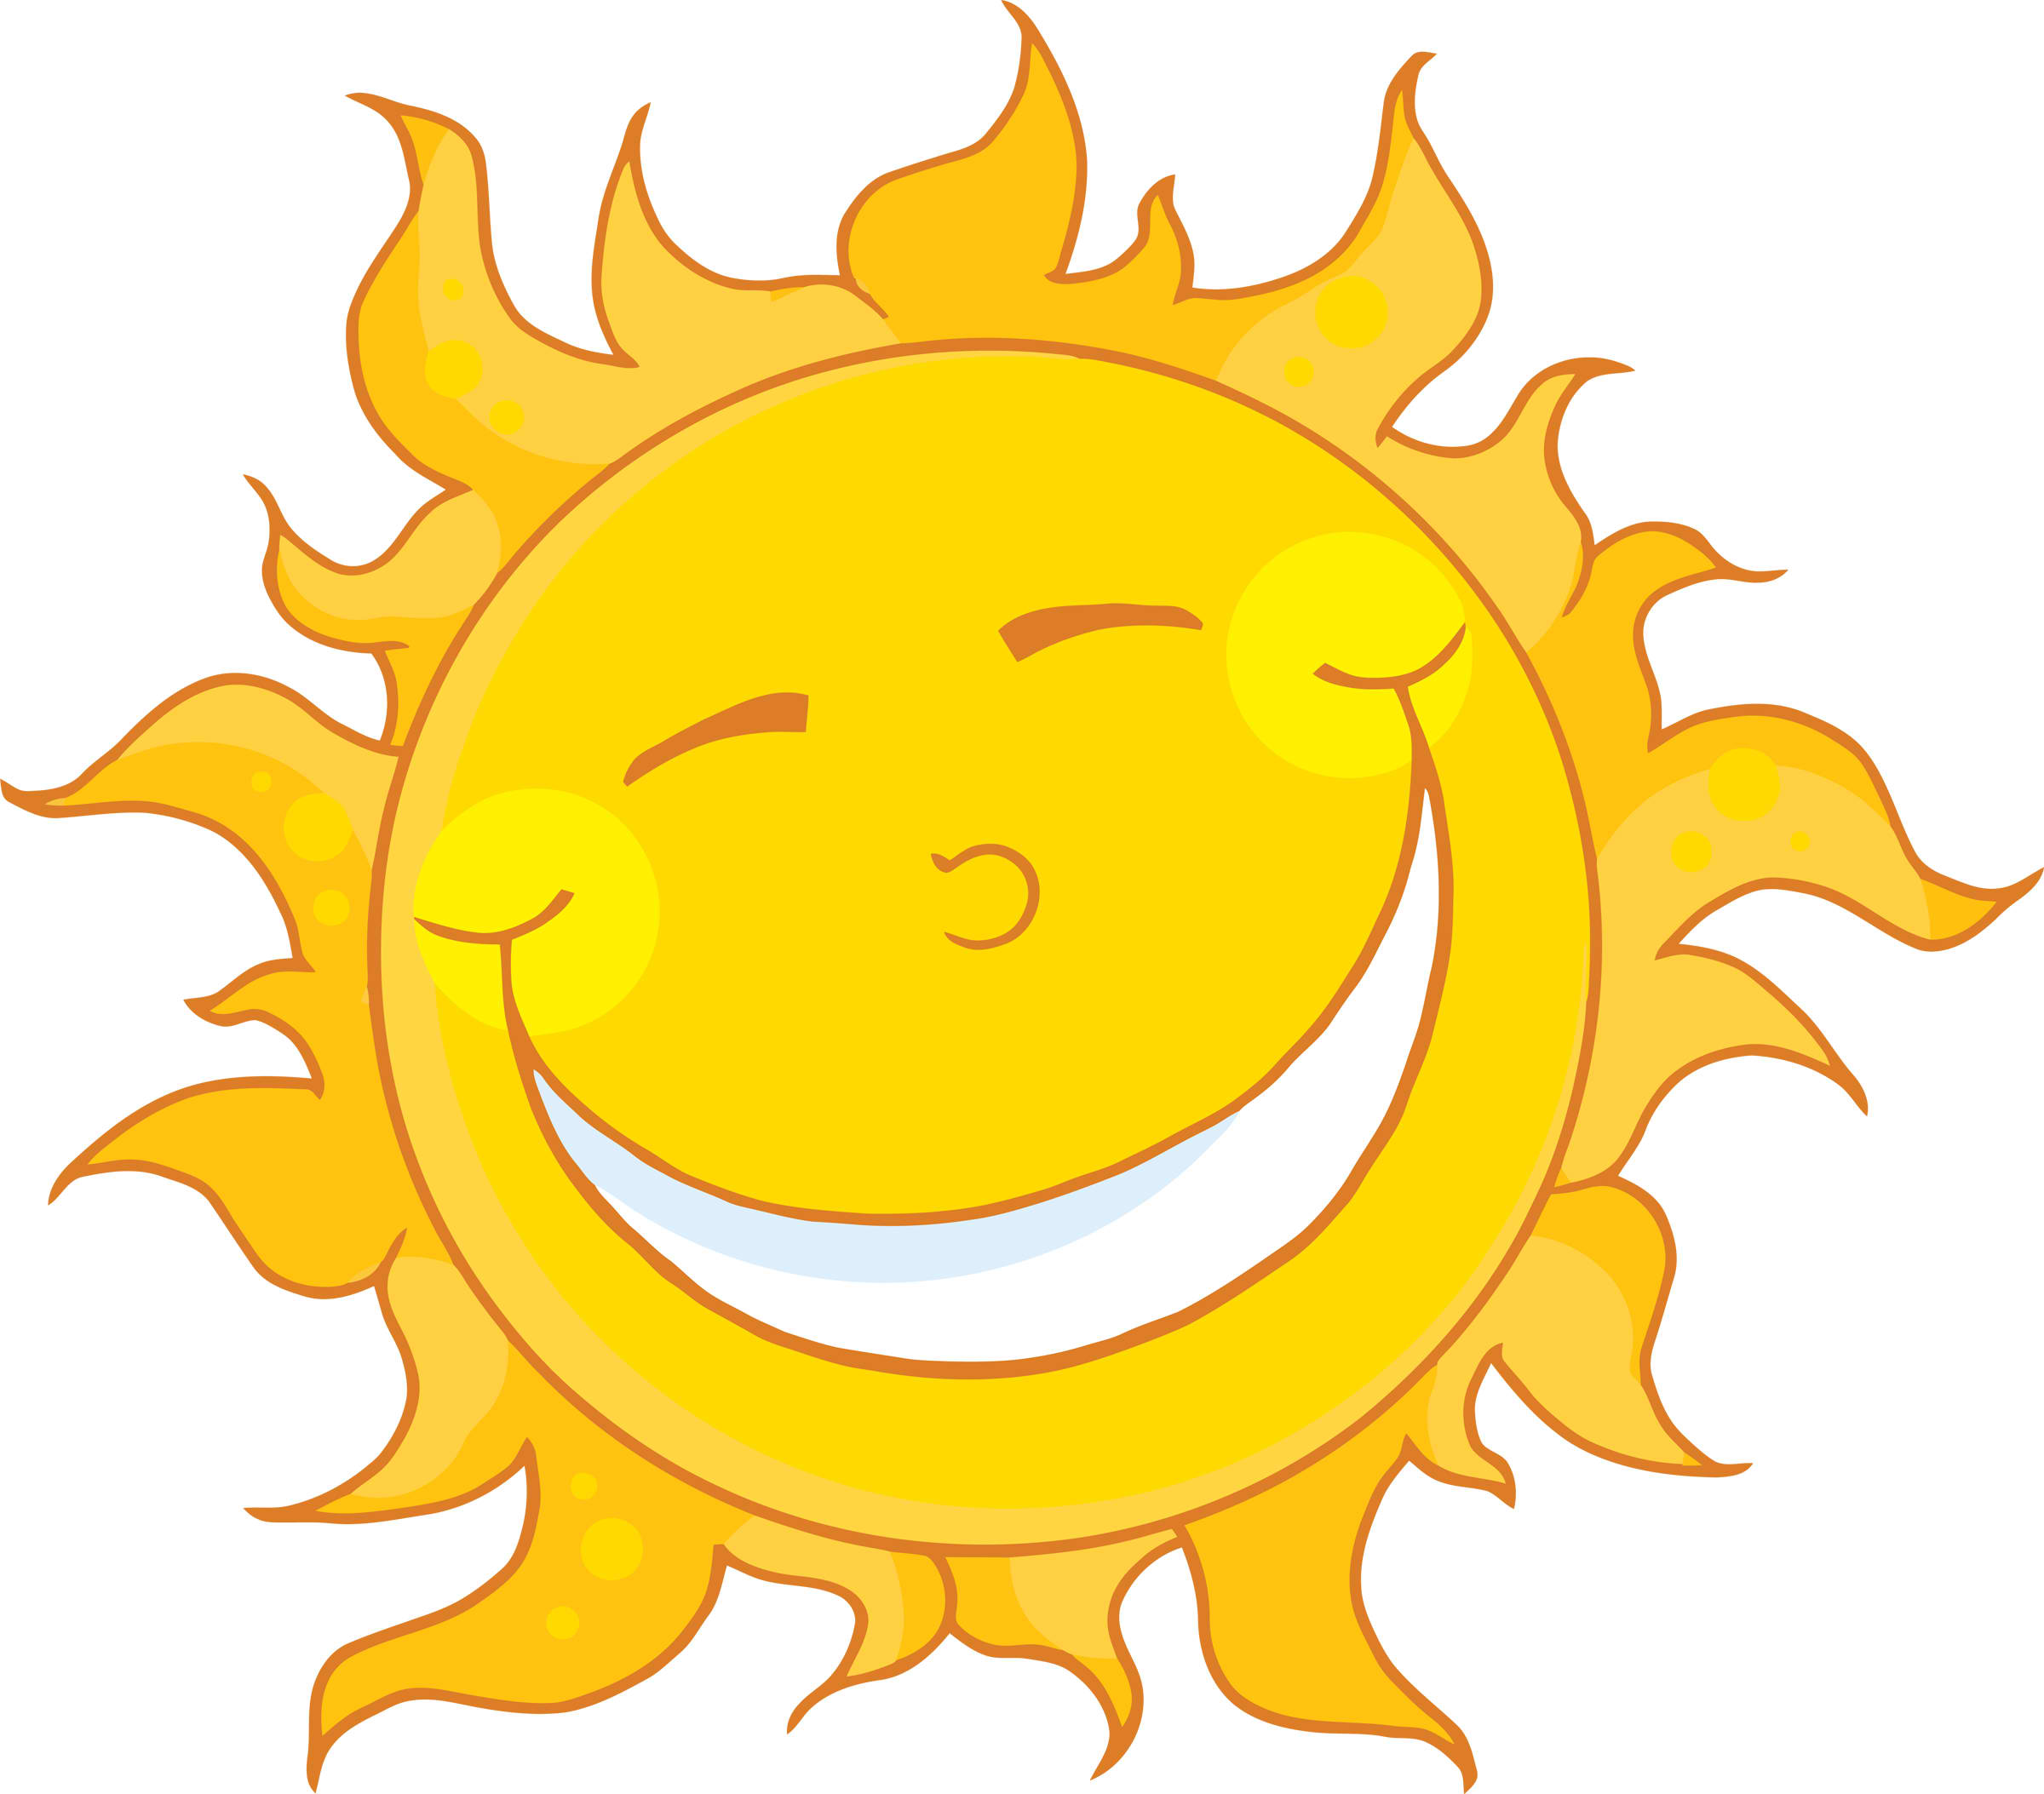 Happy Sun With Sunglasses   Clipart Panda   Free Clipart Images